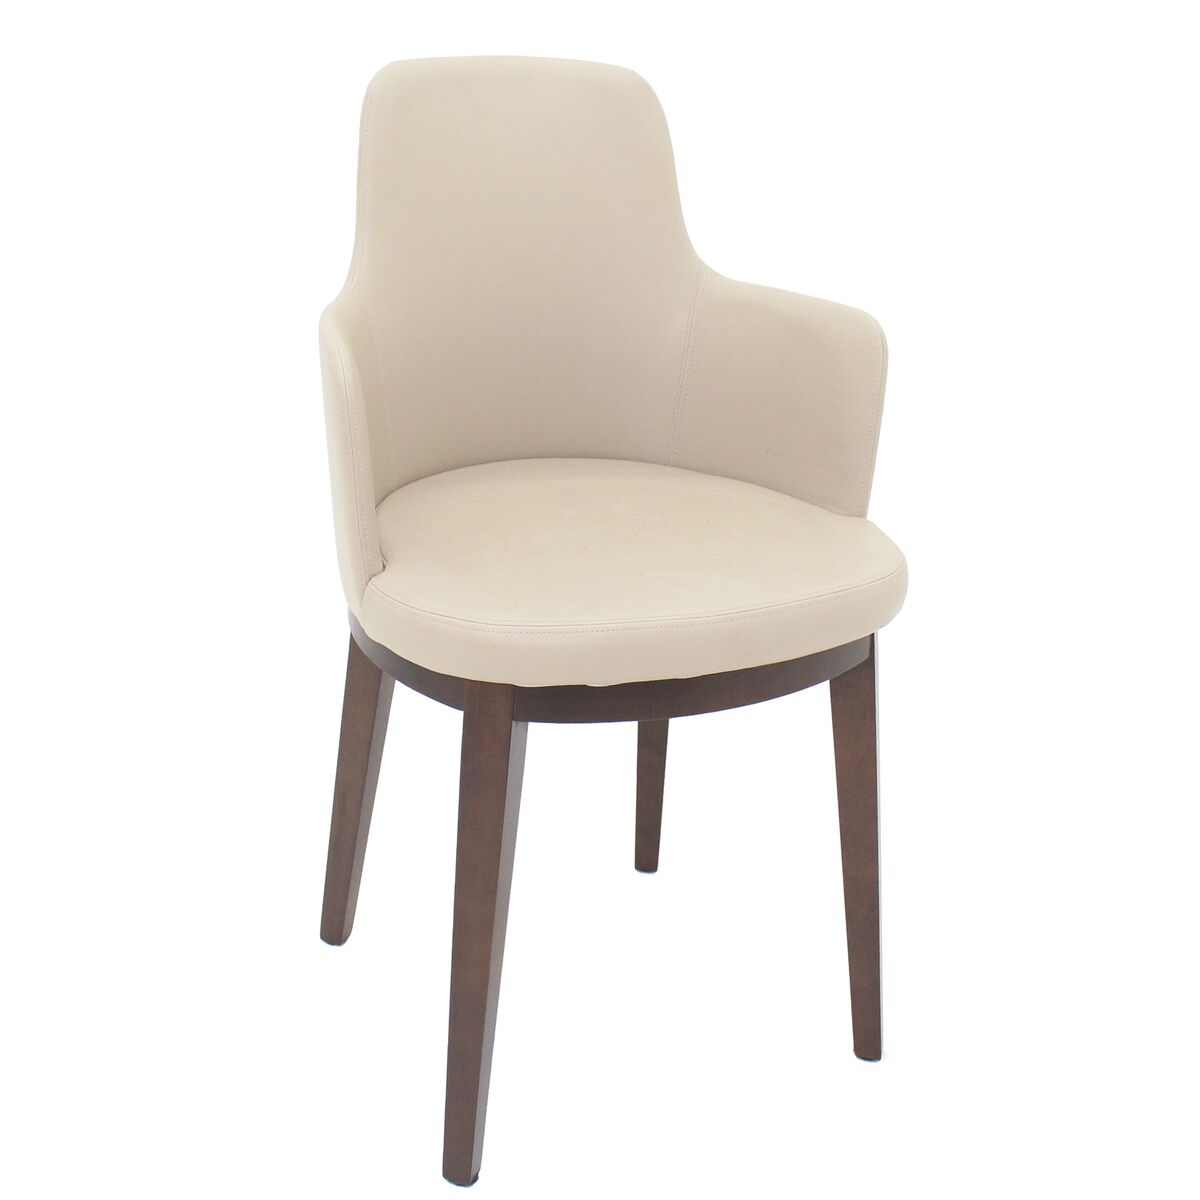 Tramontina London Armchair in Dark Brown-Colored Tauari Wood with Beige Leatherette Upholstery